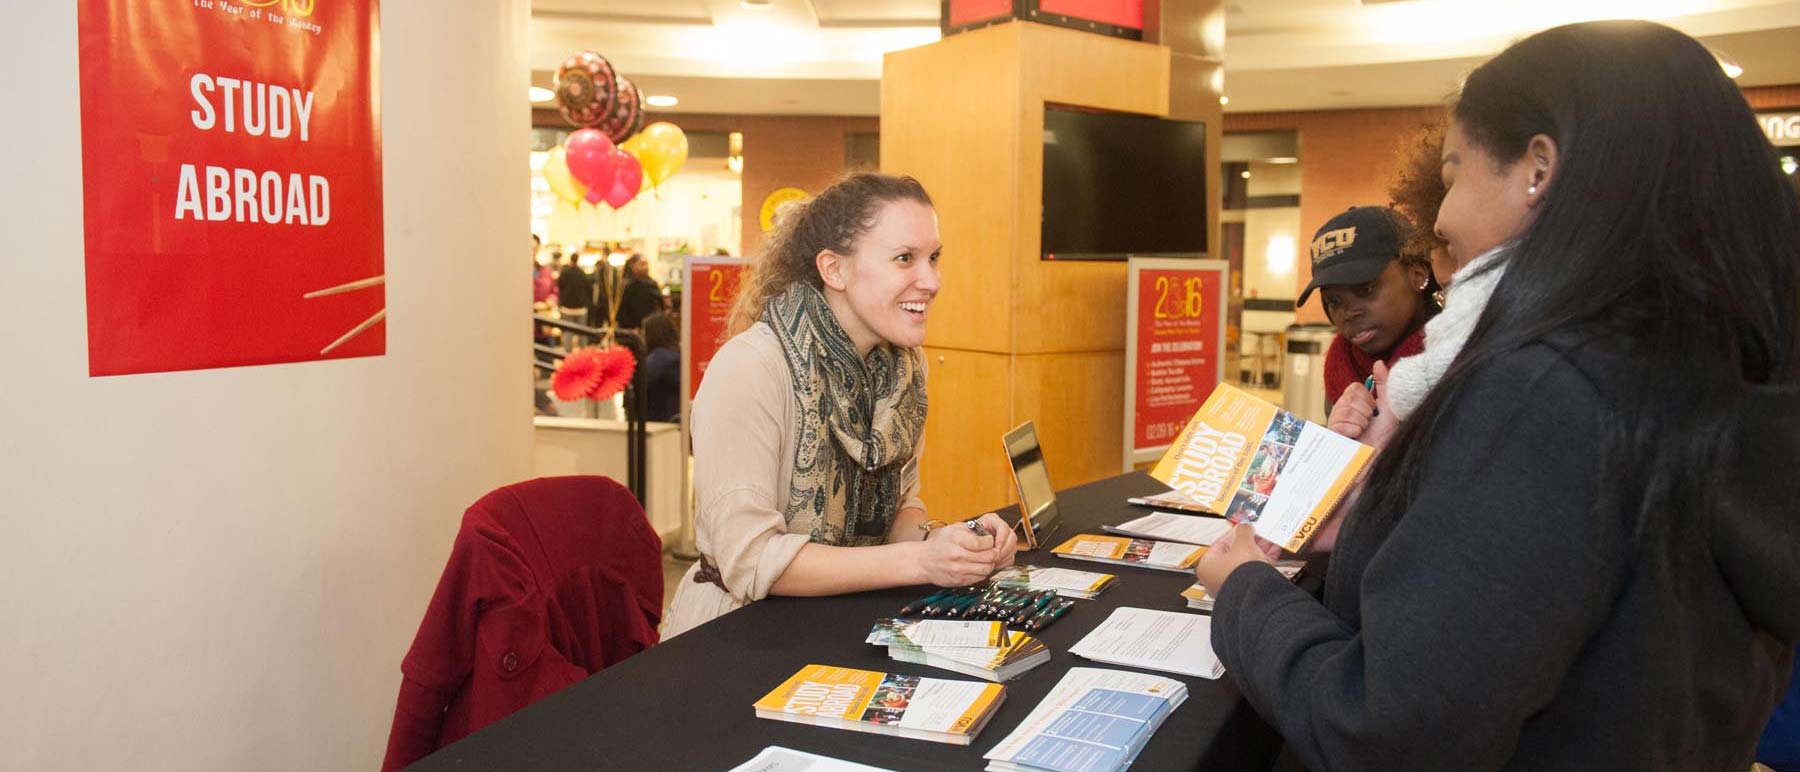 students talking to an adviser at a study abroad information table